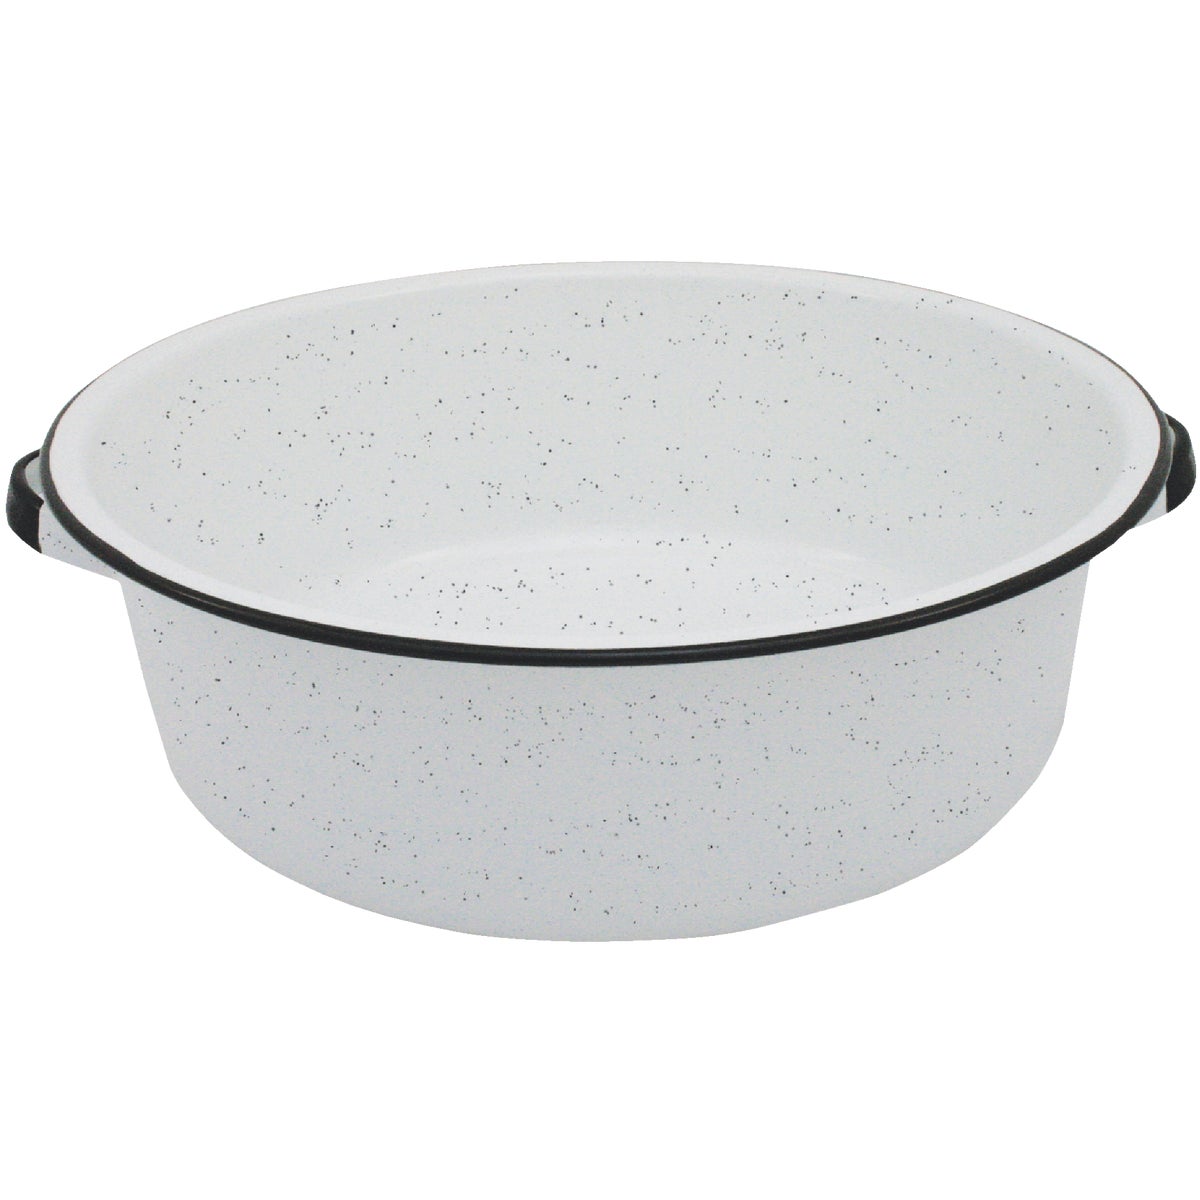 Item 600519, Round steel dishpan with handles.